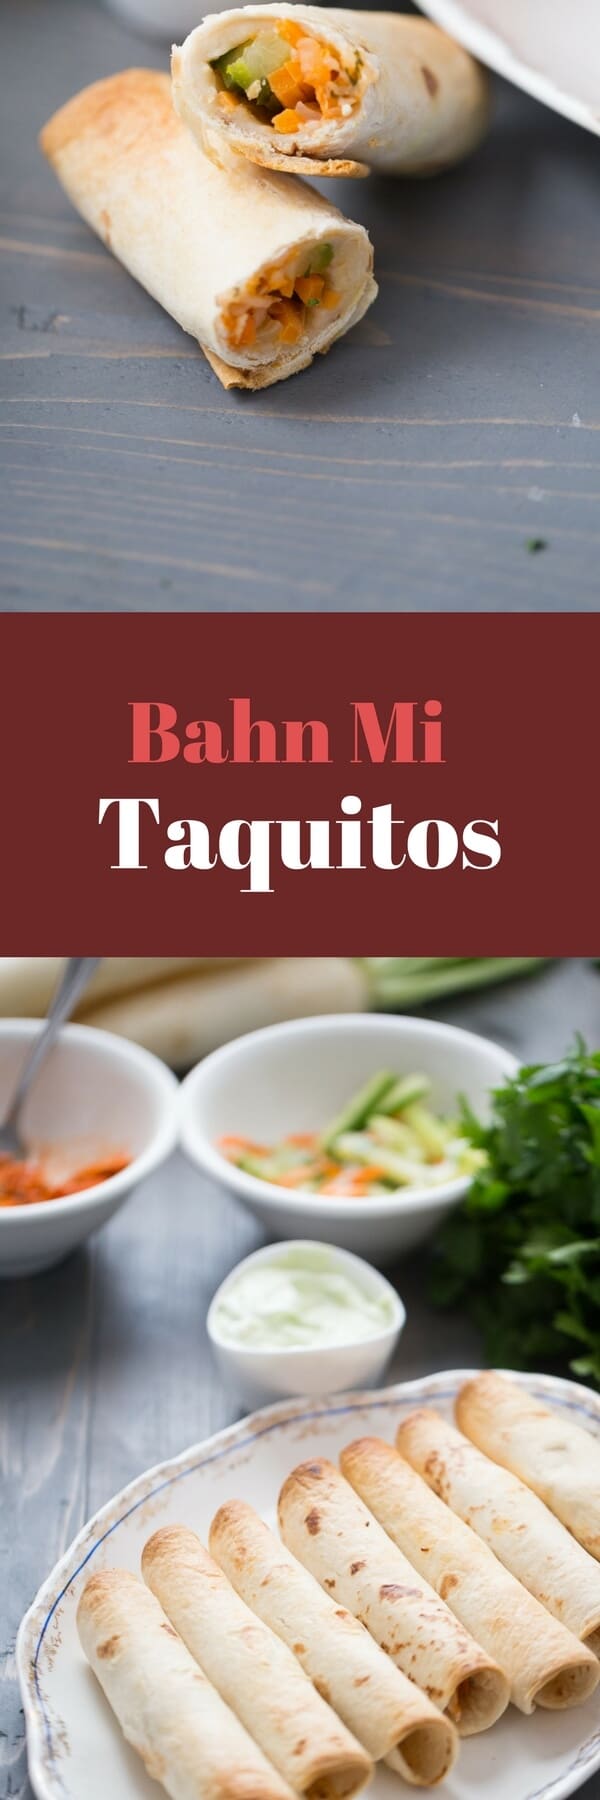 East meets west in these Bahn Mi Taquitos! Salmon and fresh veggies make this recipe easy and delicious!